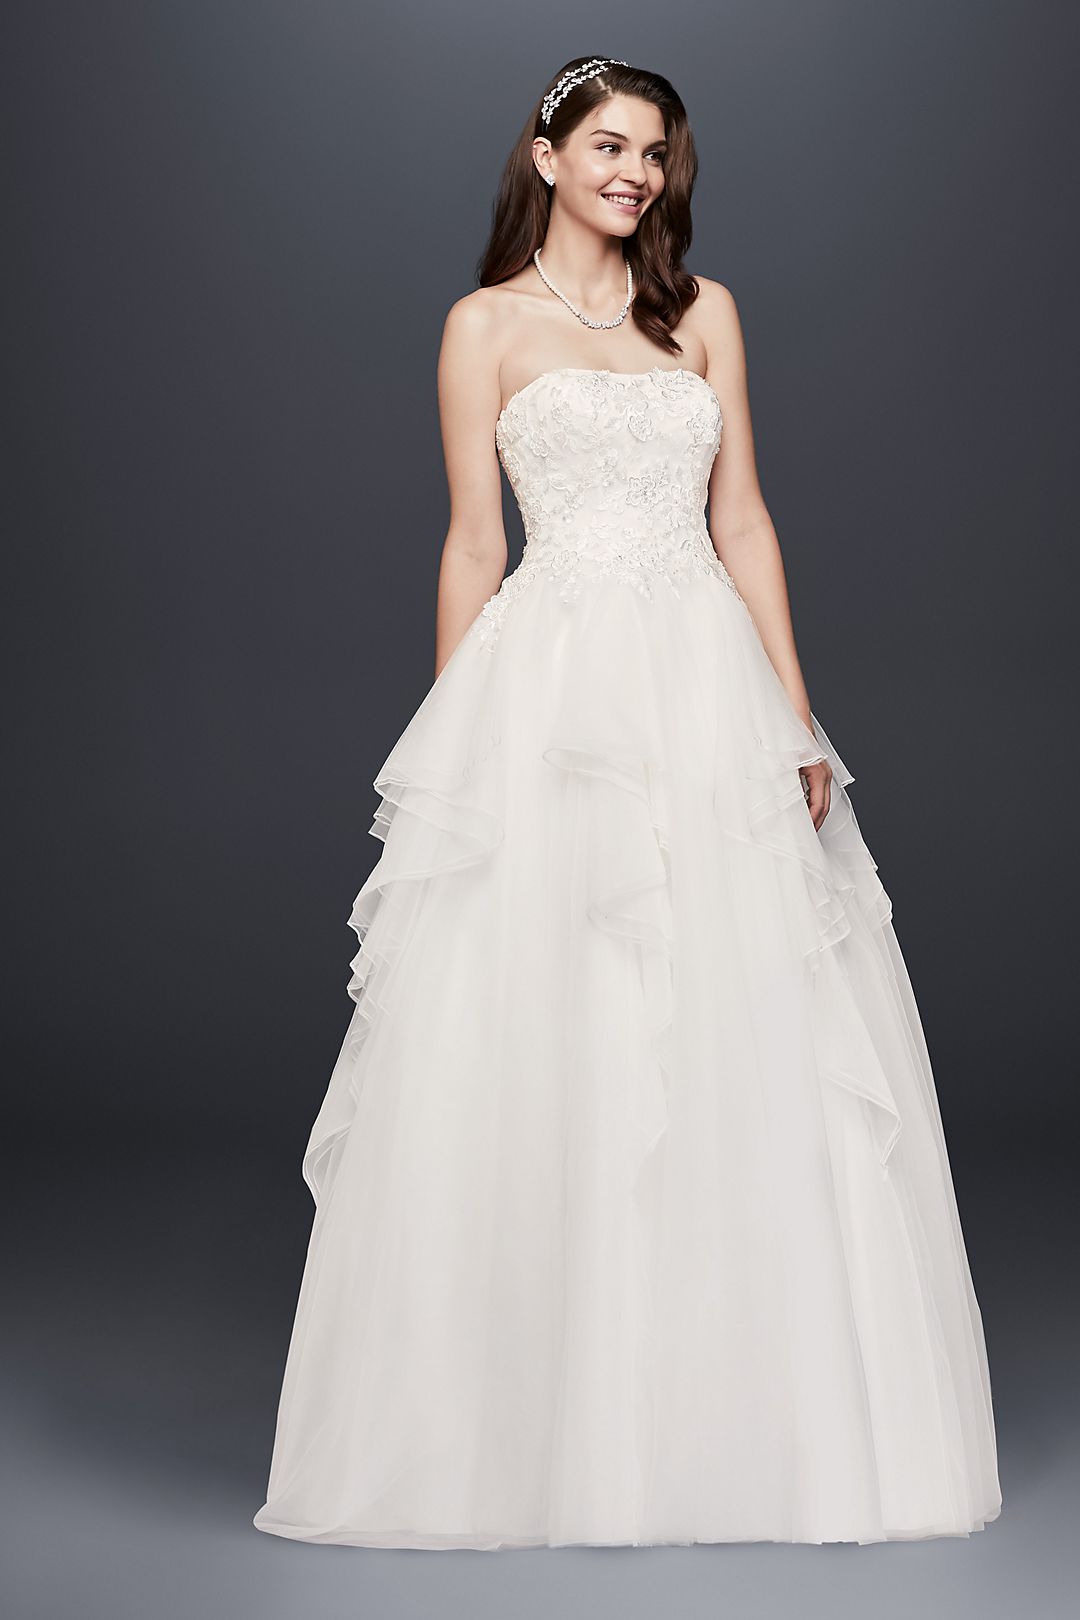 Tulle Wedding Dress with 3D Floral Appliques